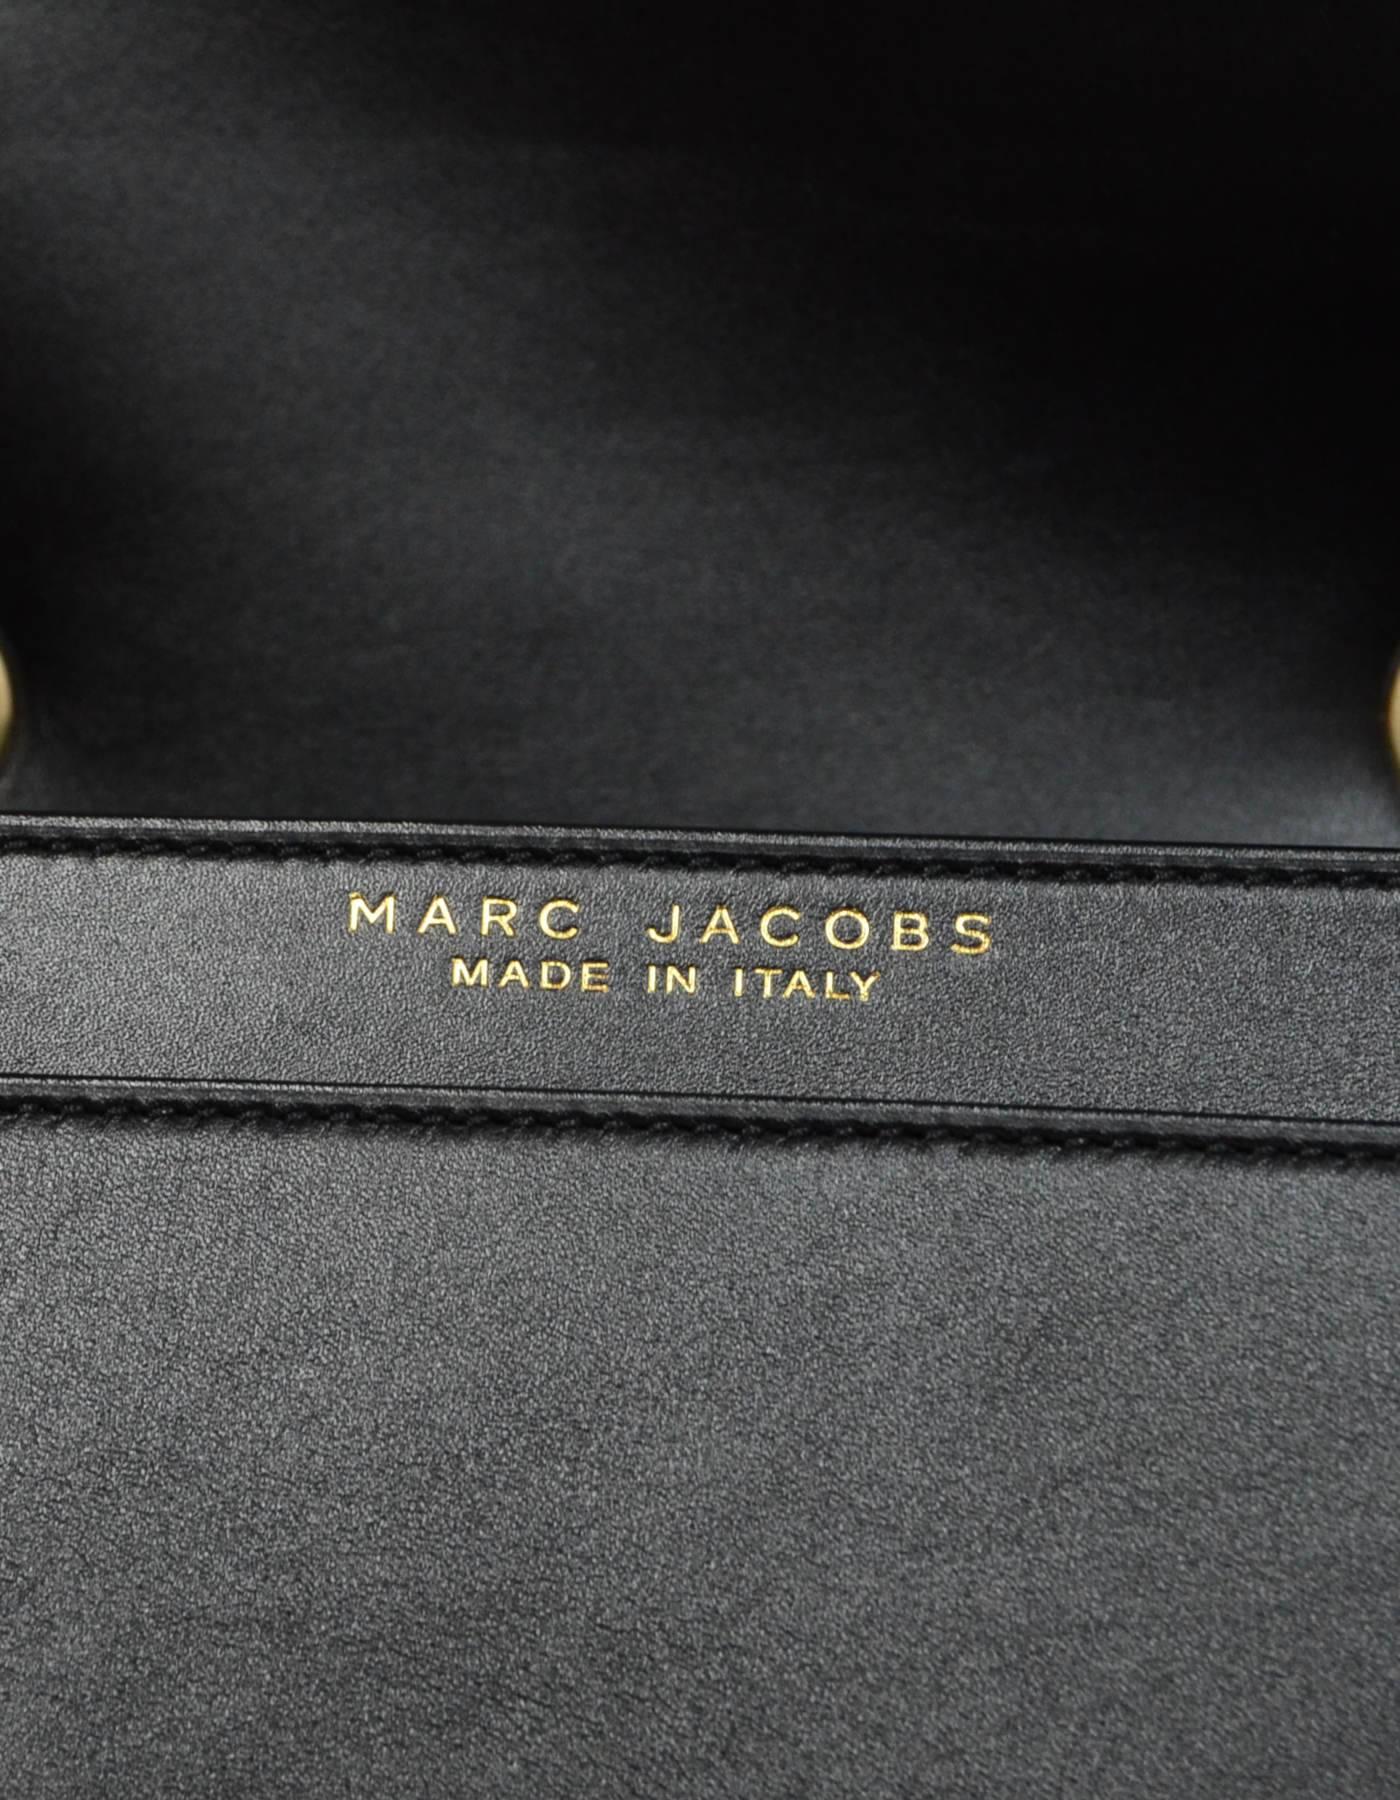 Women's Marc Jacobs Black Leather Big Trouble Bag with Dust Bag